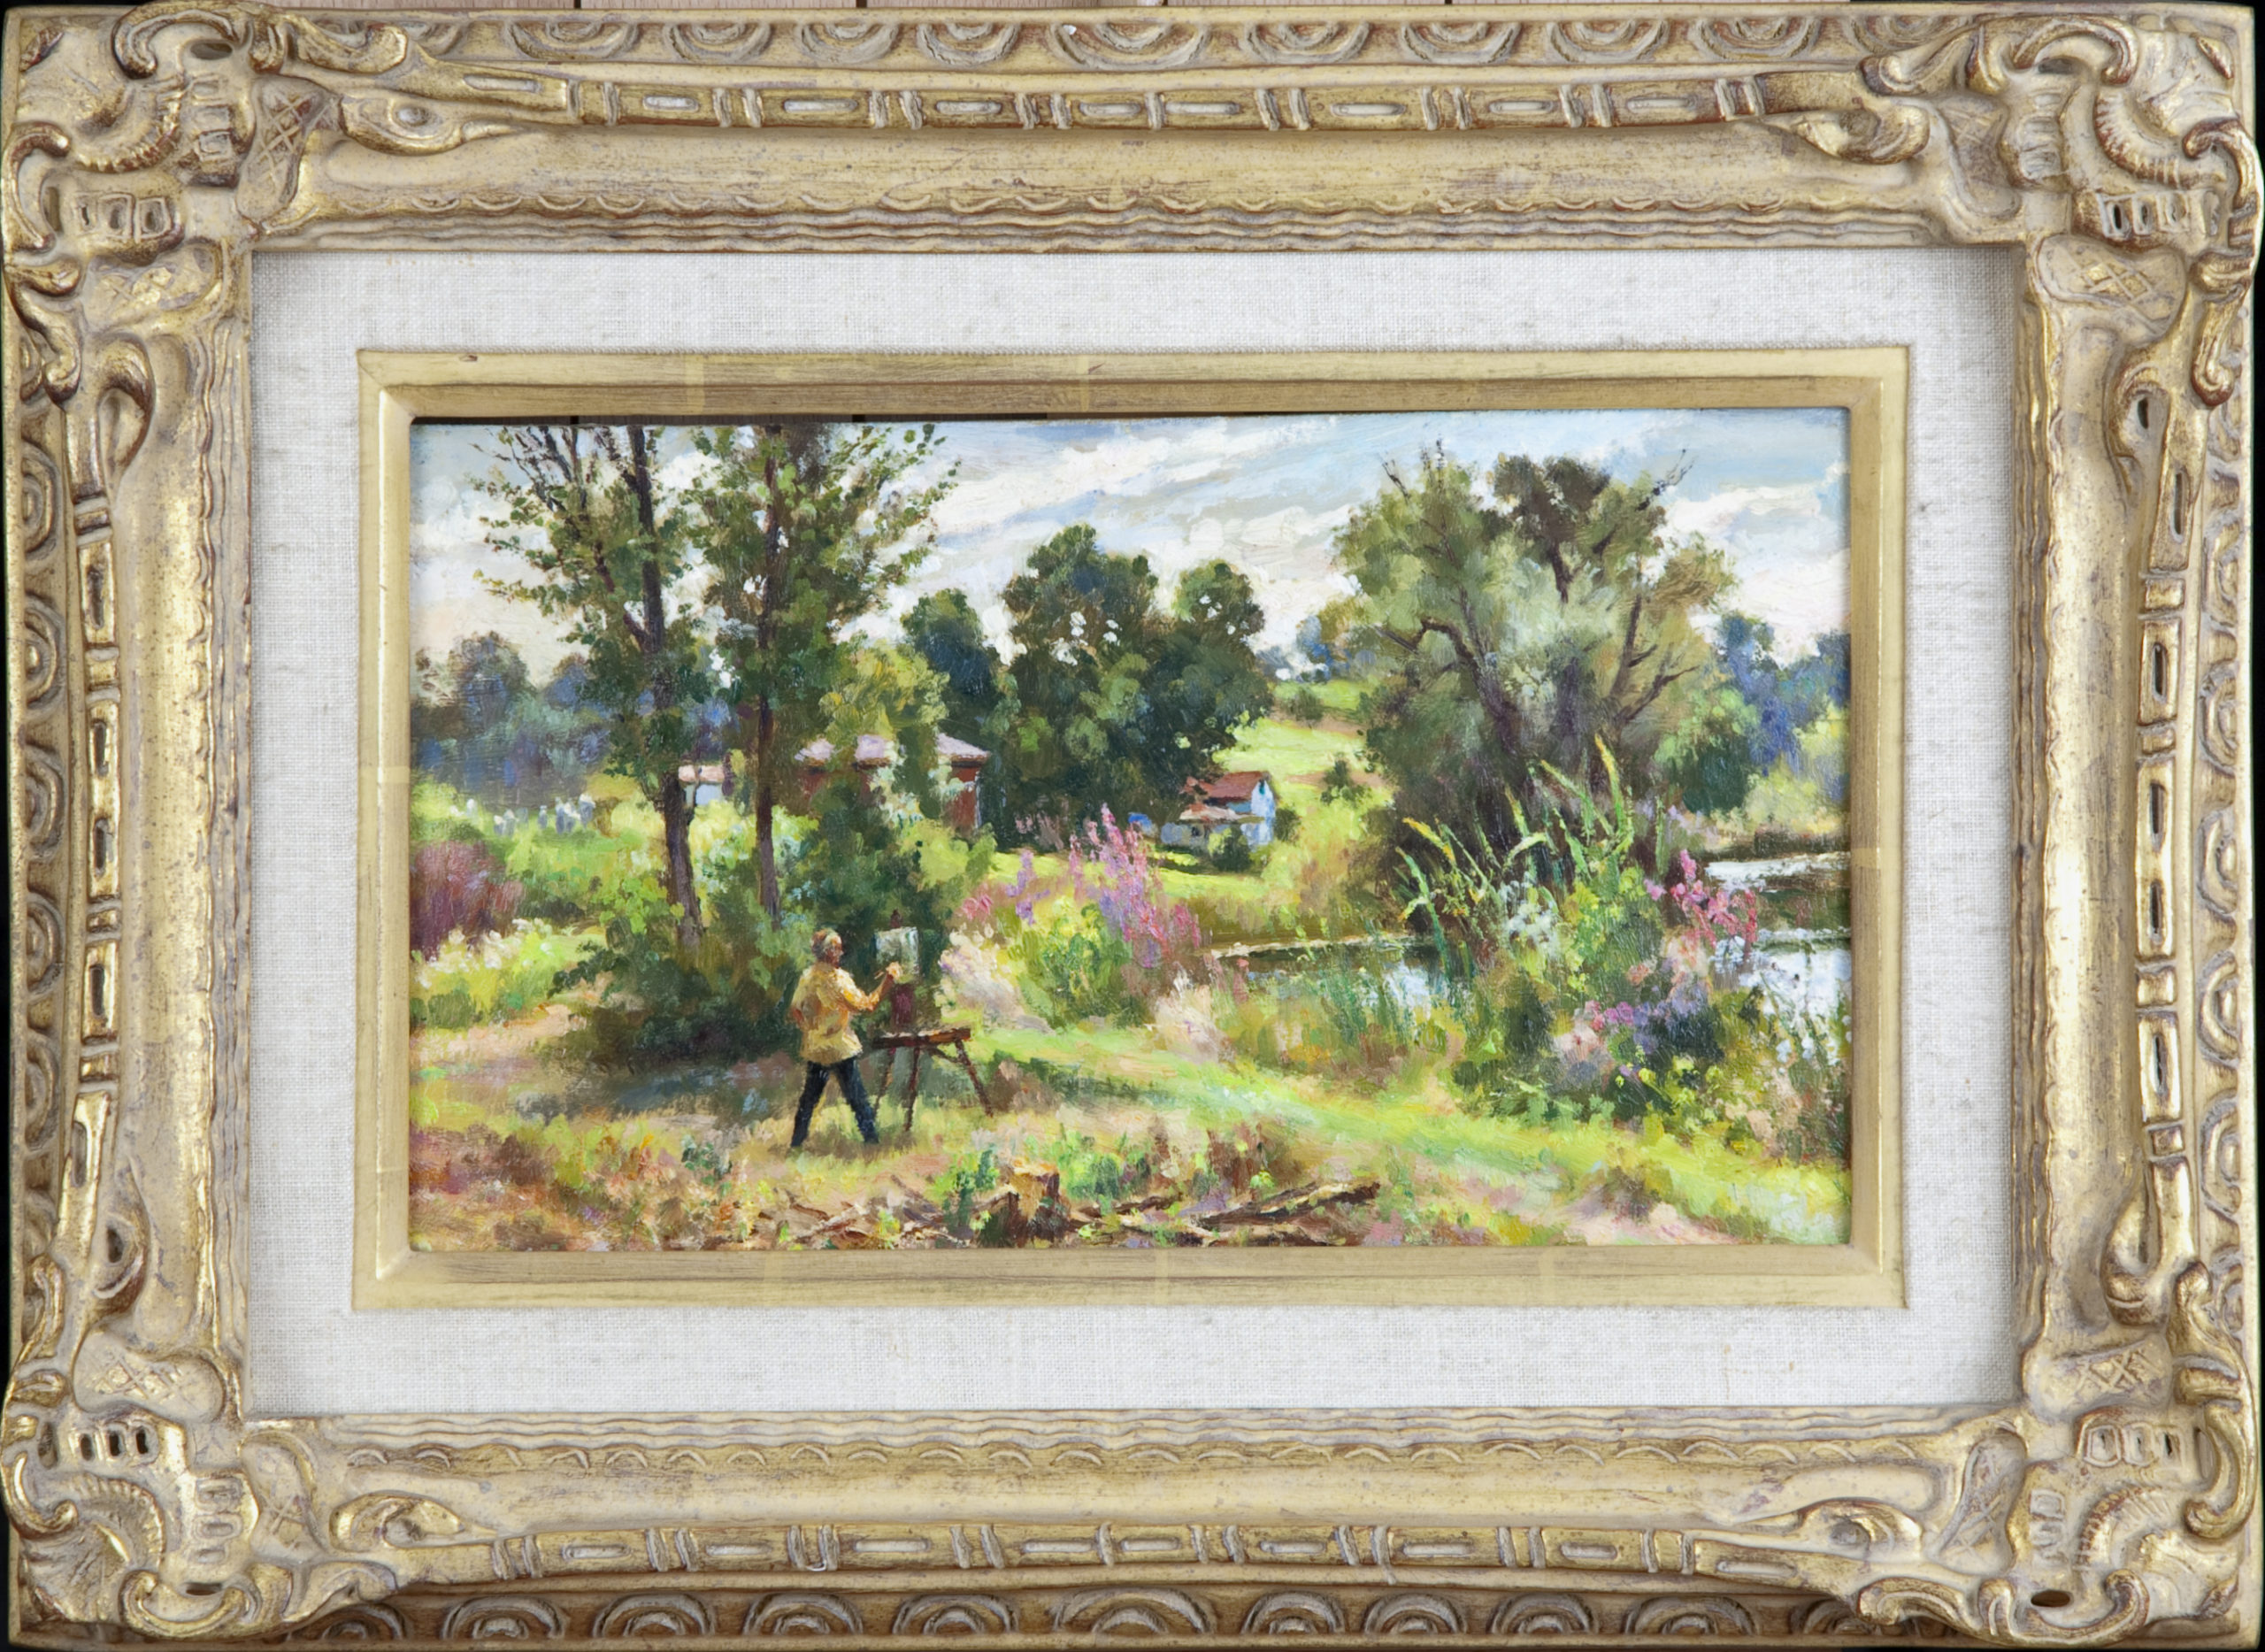 058 Painting at the lakeside 1981 - Oil on Masonite - 12 x 7 - Frame: 18.25 x 13.5 x 3